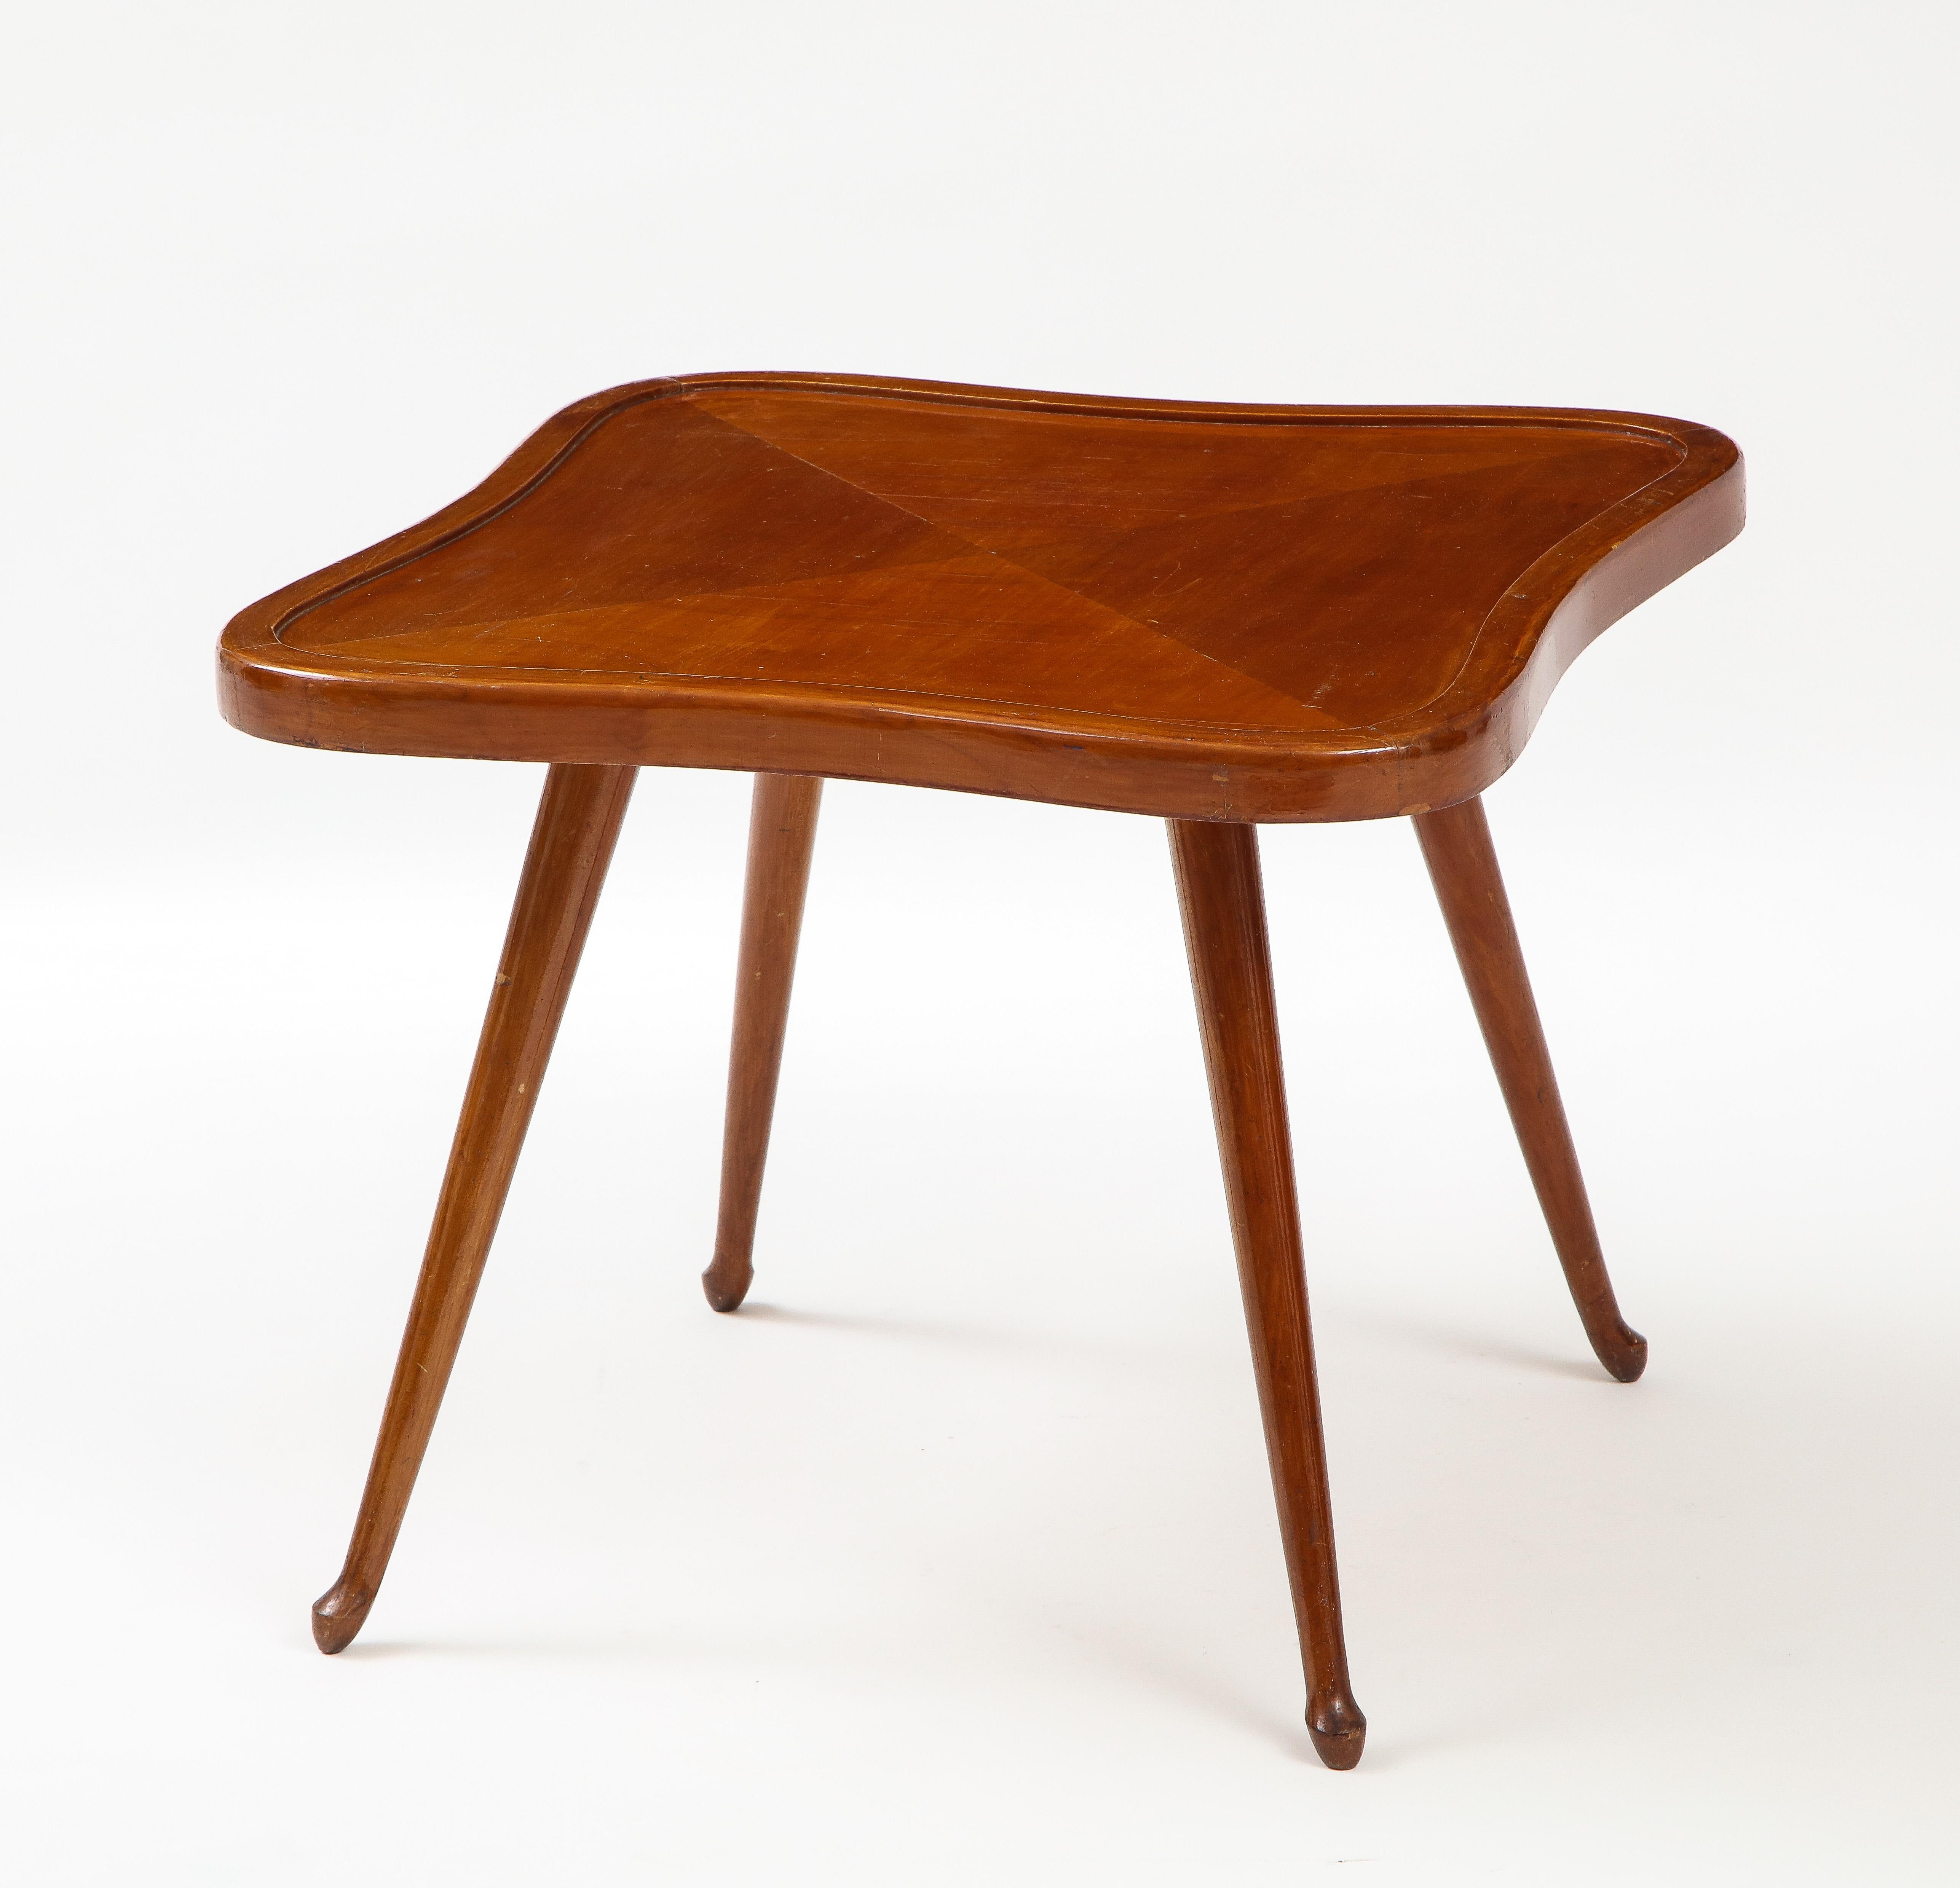 Paolo Buffa 'Attrib.' Occasional Clover Shaped Table, c. 1950-60 1